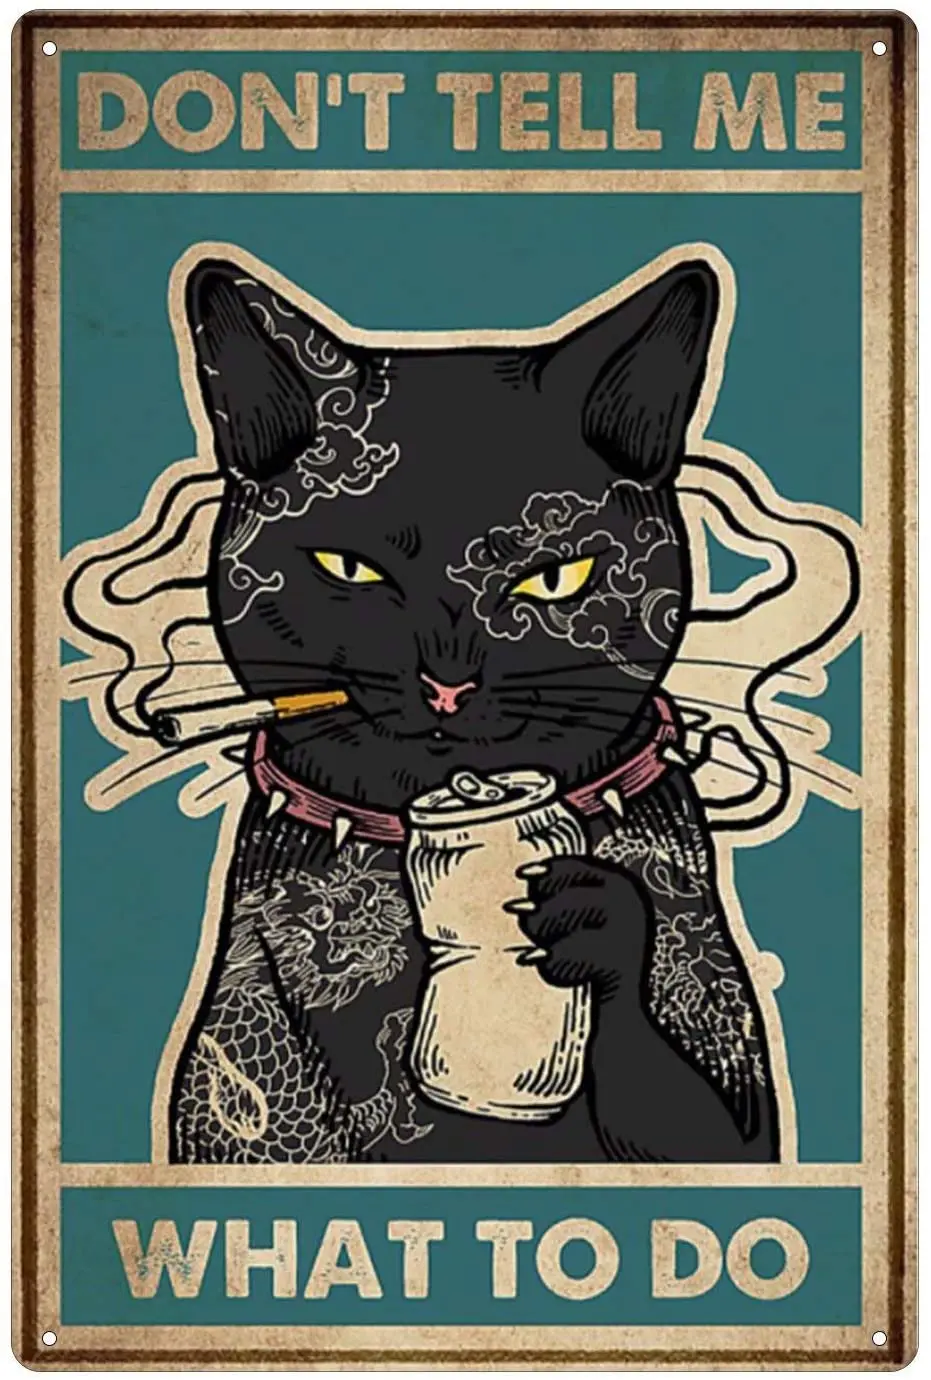 

Cat Smokes Metal Tin Sign,Dont Tell Me What to Do Retro Poster Garage Kitchen Wall Plaque Home Decor Cafe Bar Pub Beer Club